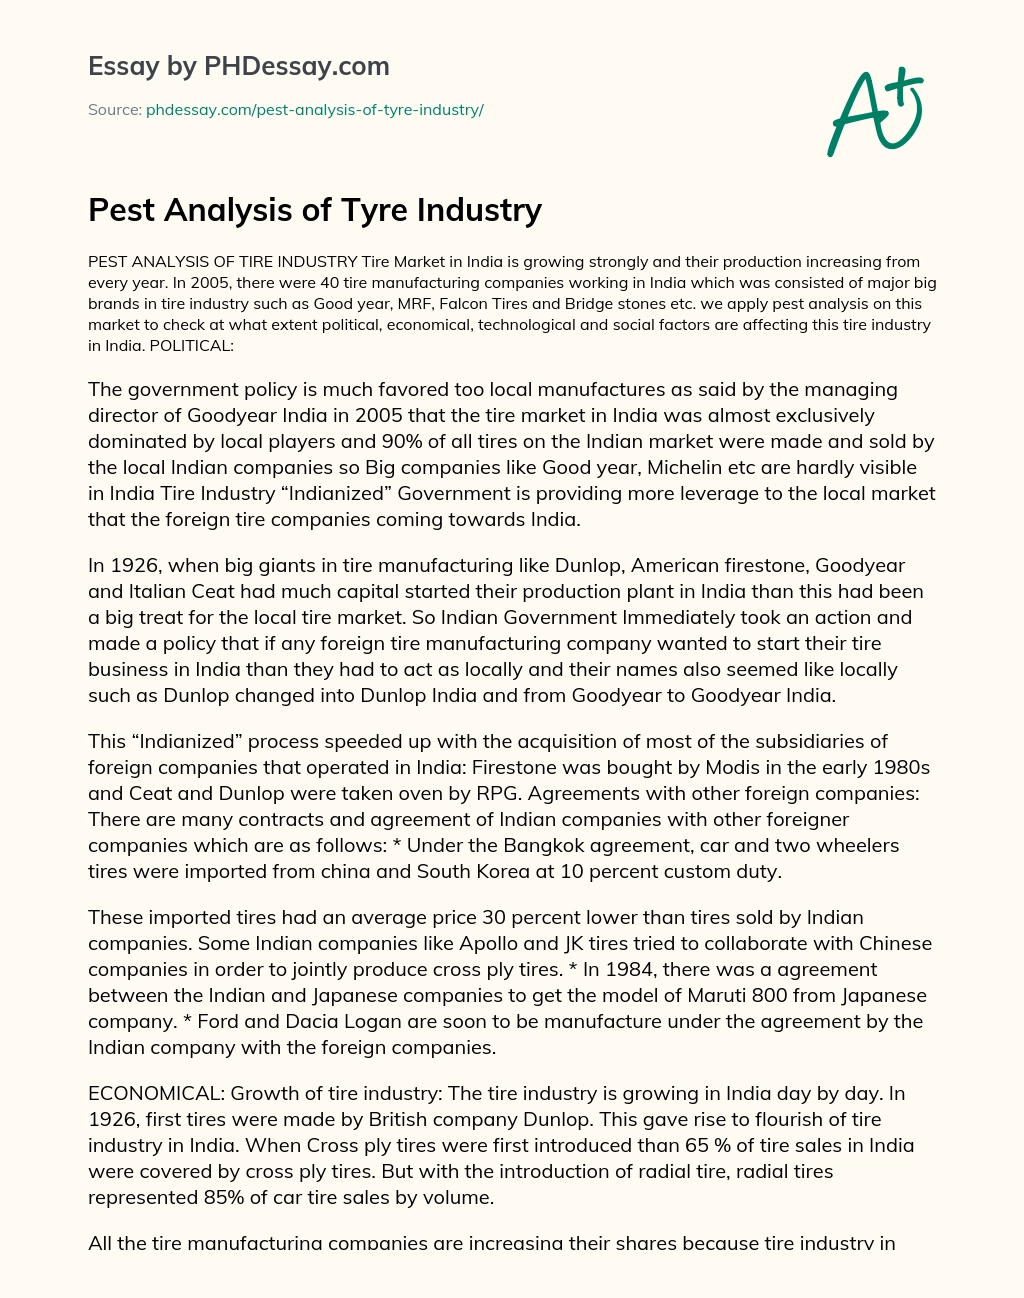 Pest Analysis of Tyre Industry essay